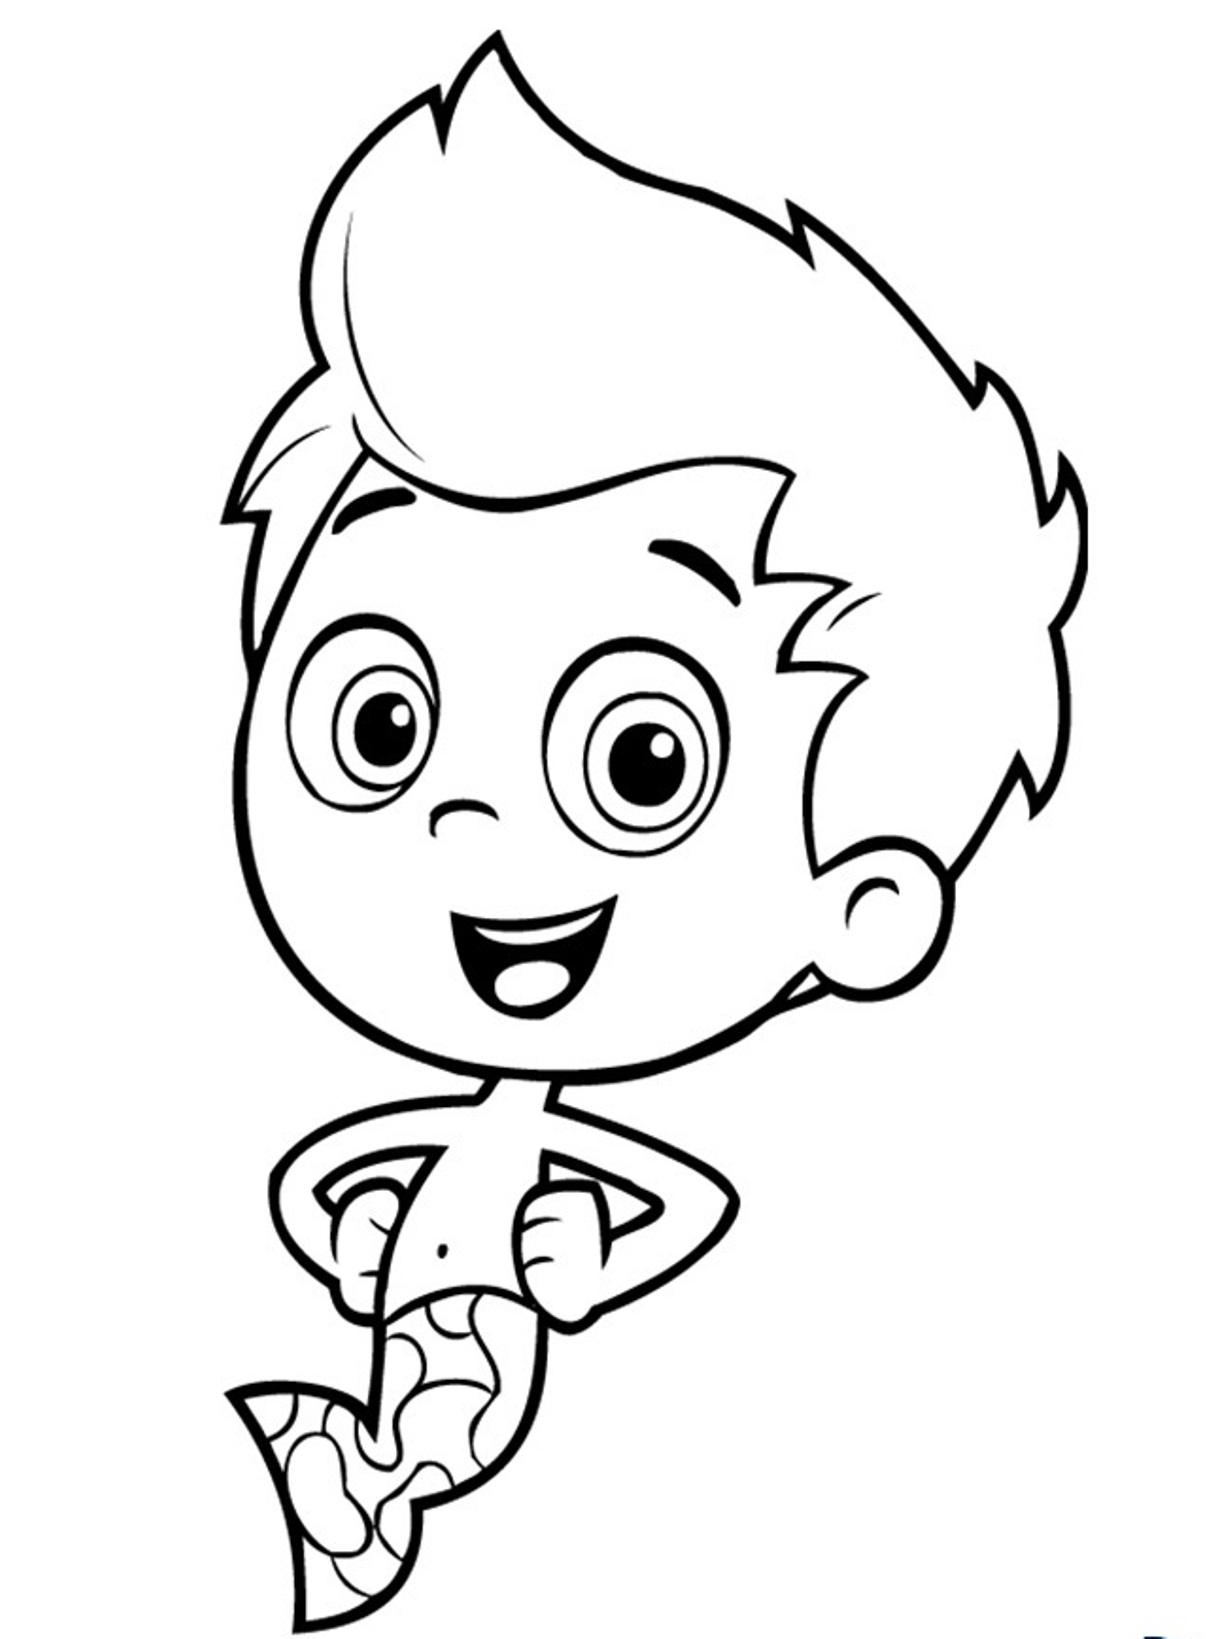 Printable Bubble Guppies Coloring Pages Bubble Guppies Coloring Pages Best Coloring Pages For Kids